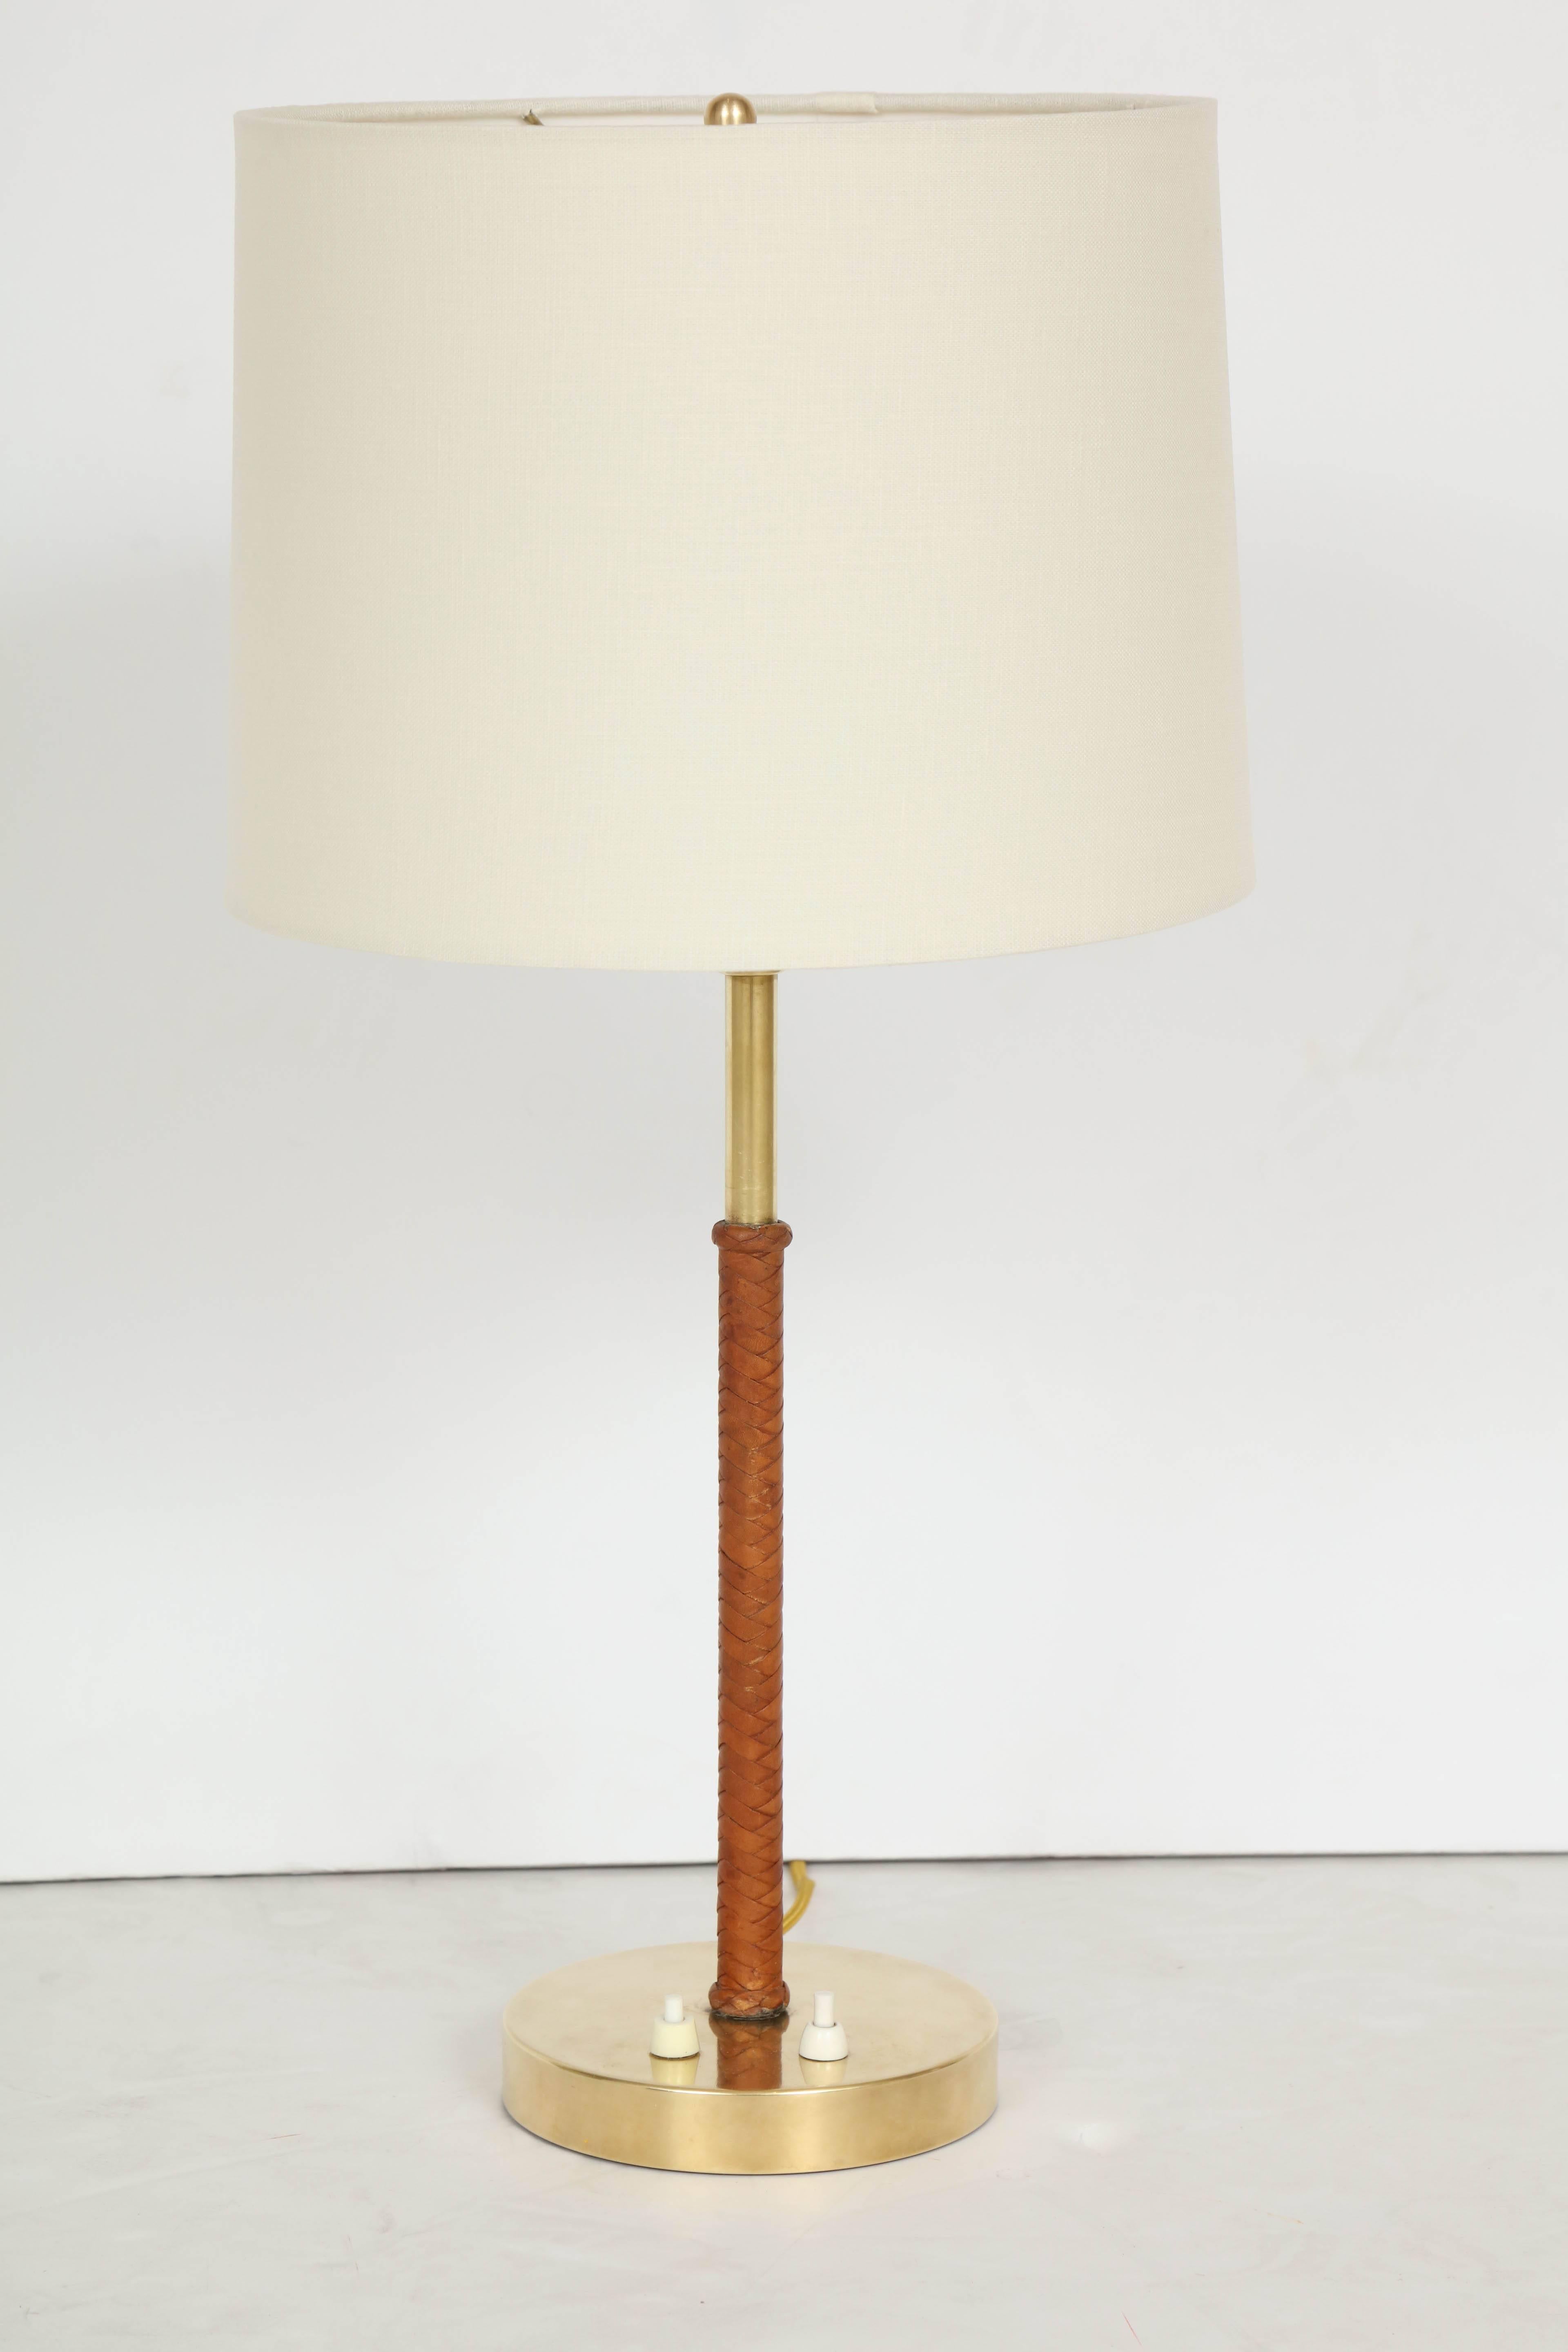 NK- Nordiska Kompaniet Table Lamp, Sweden 1940s, Brass a leather woven wrap stem with a new linen shade. Two base switches, one for three down lights and one up light. Restored including re-wiring for US.

Stamped on base.